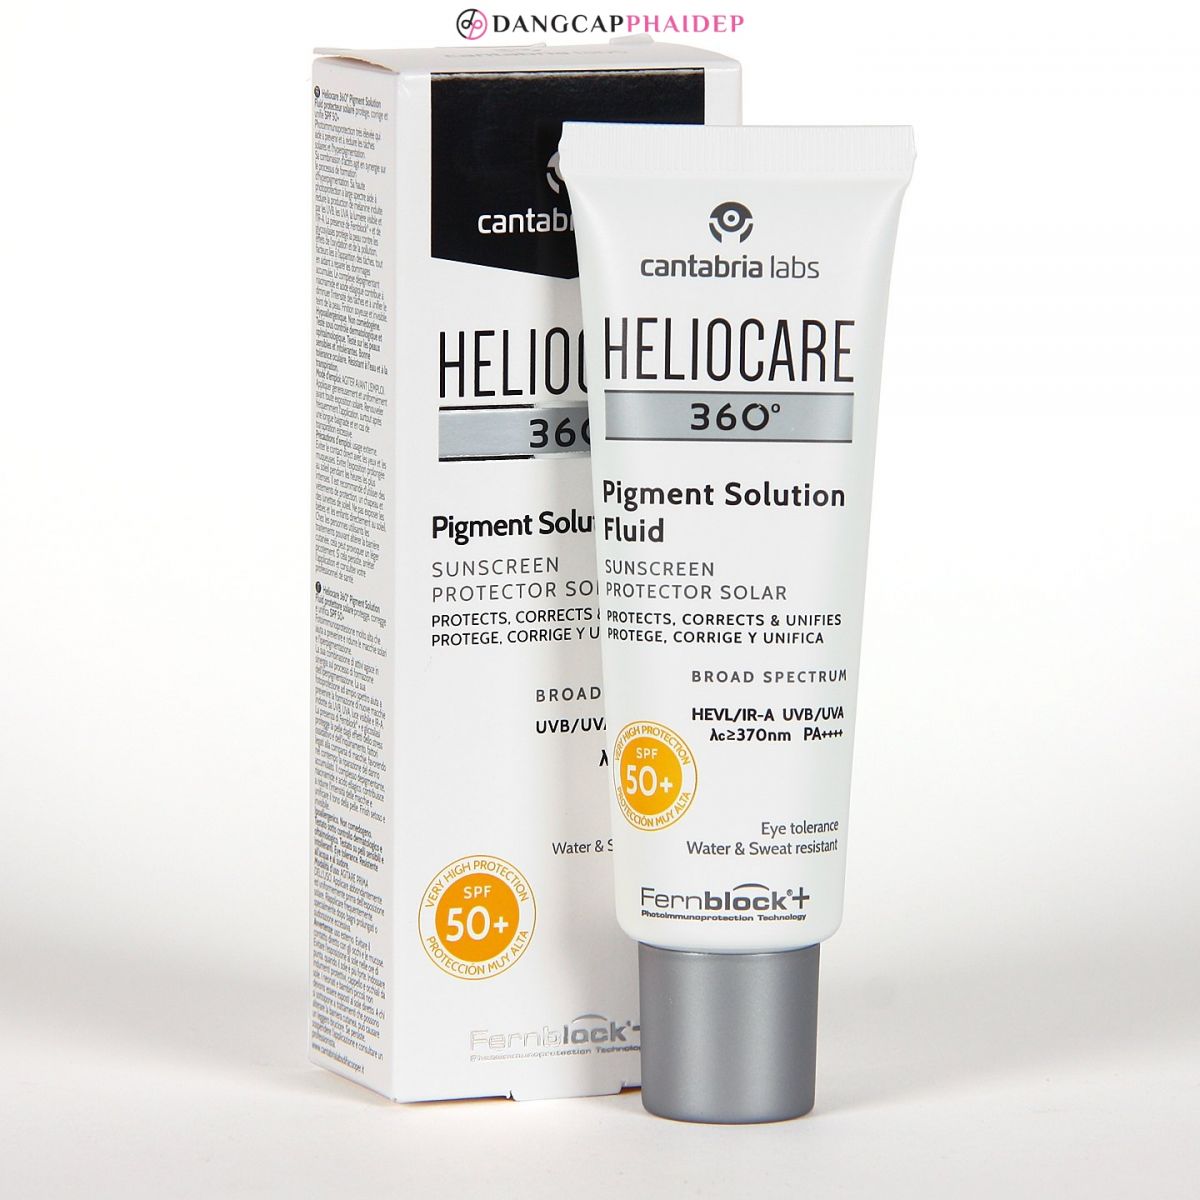 Kem chống nắng Heliocare 360 Pigment Solution Fluid SPF50+.